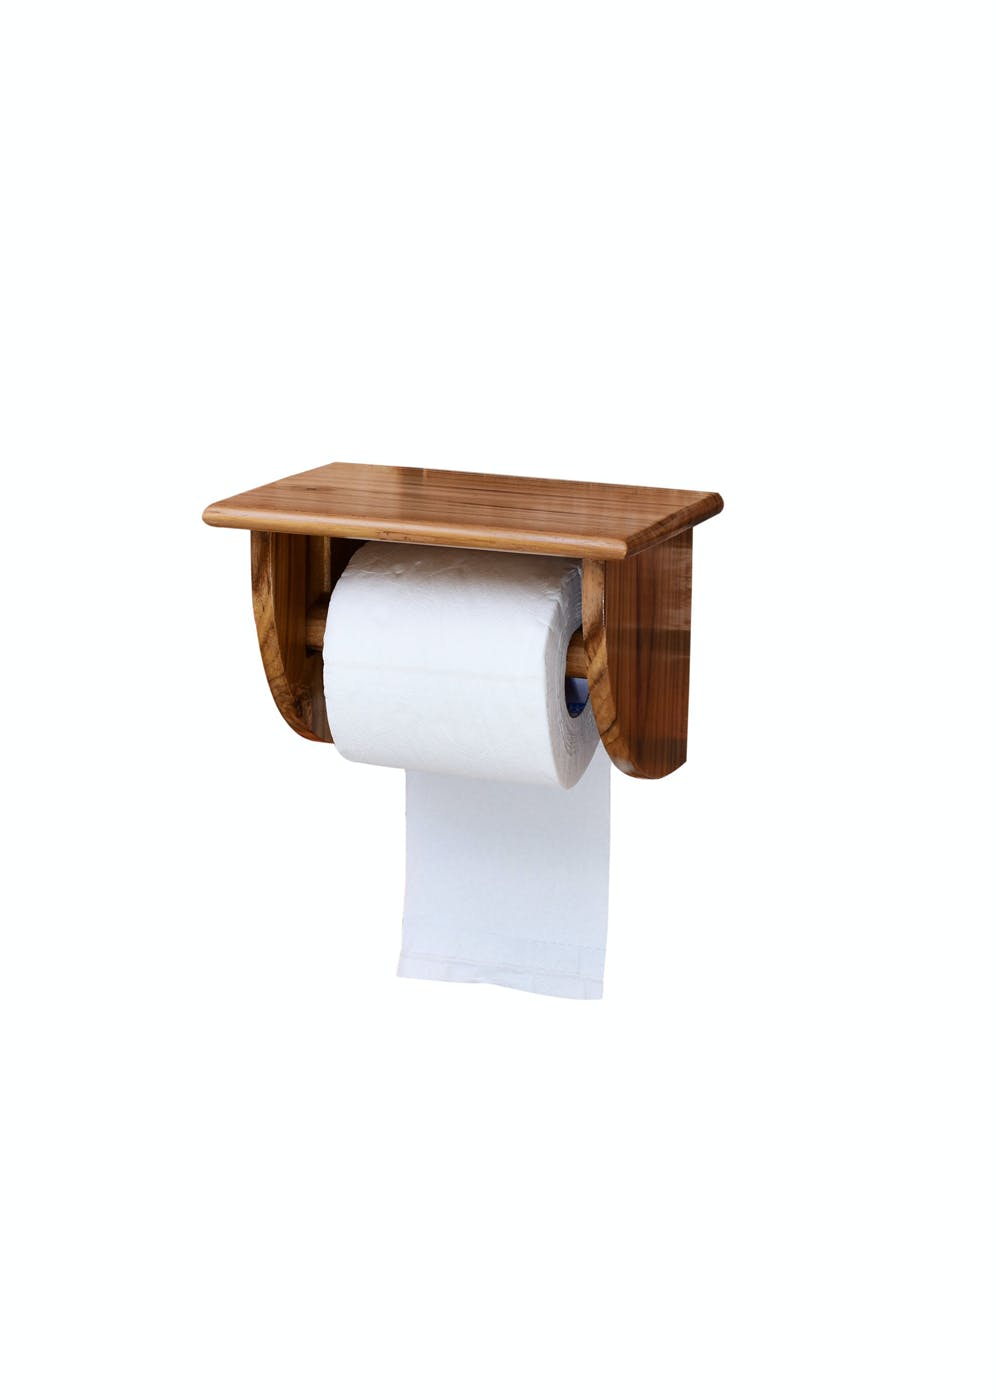 Teak Wood Wall Mounted Toilet Paper Holder with Shelf for Restaurants, Hotels